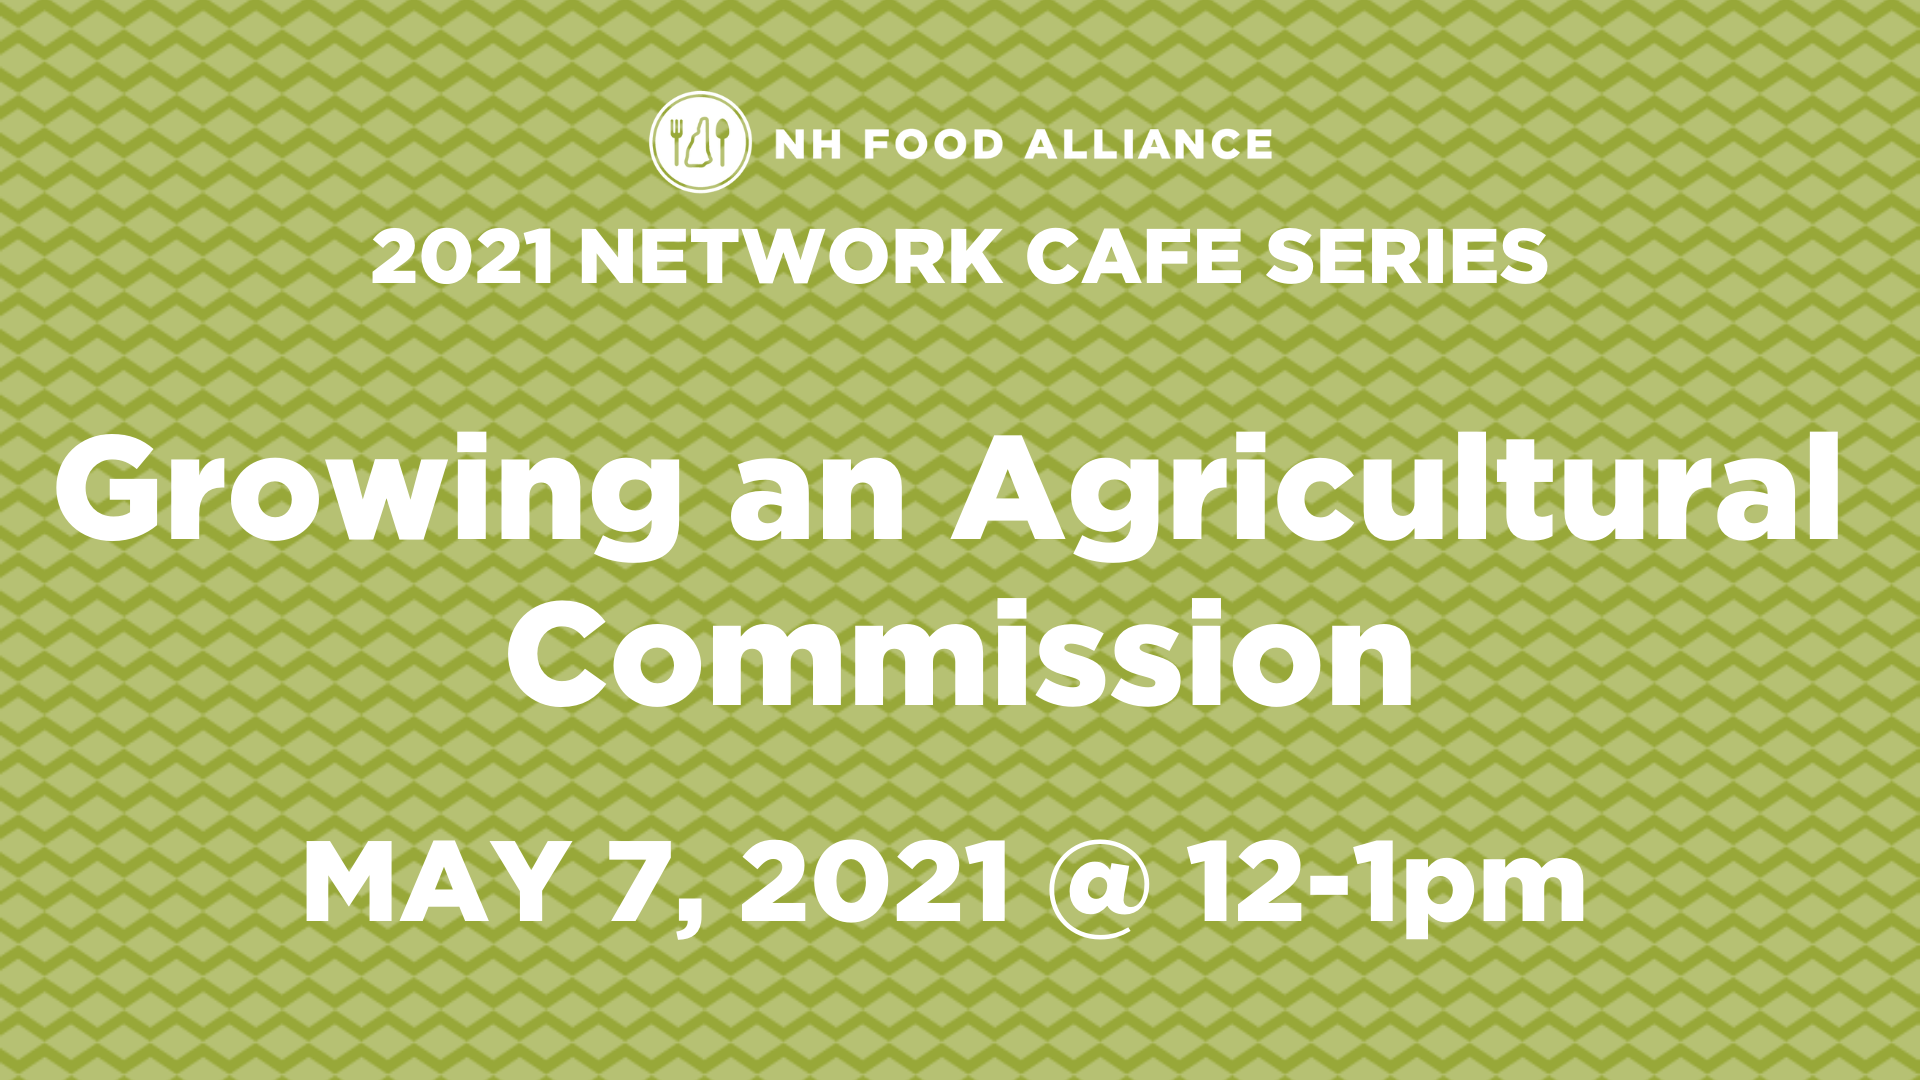 Ag-Commissions-Network-Cafe-May-7-fb-banner.png